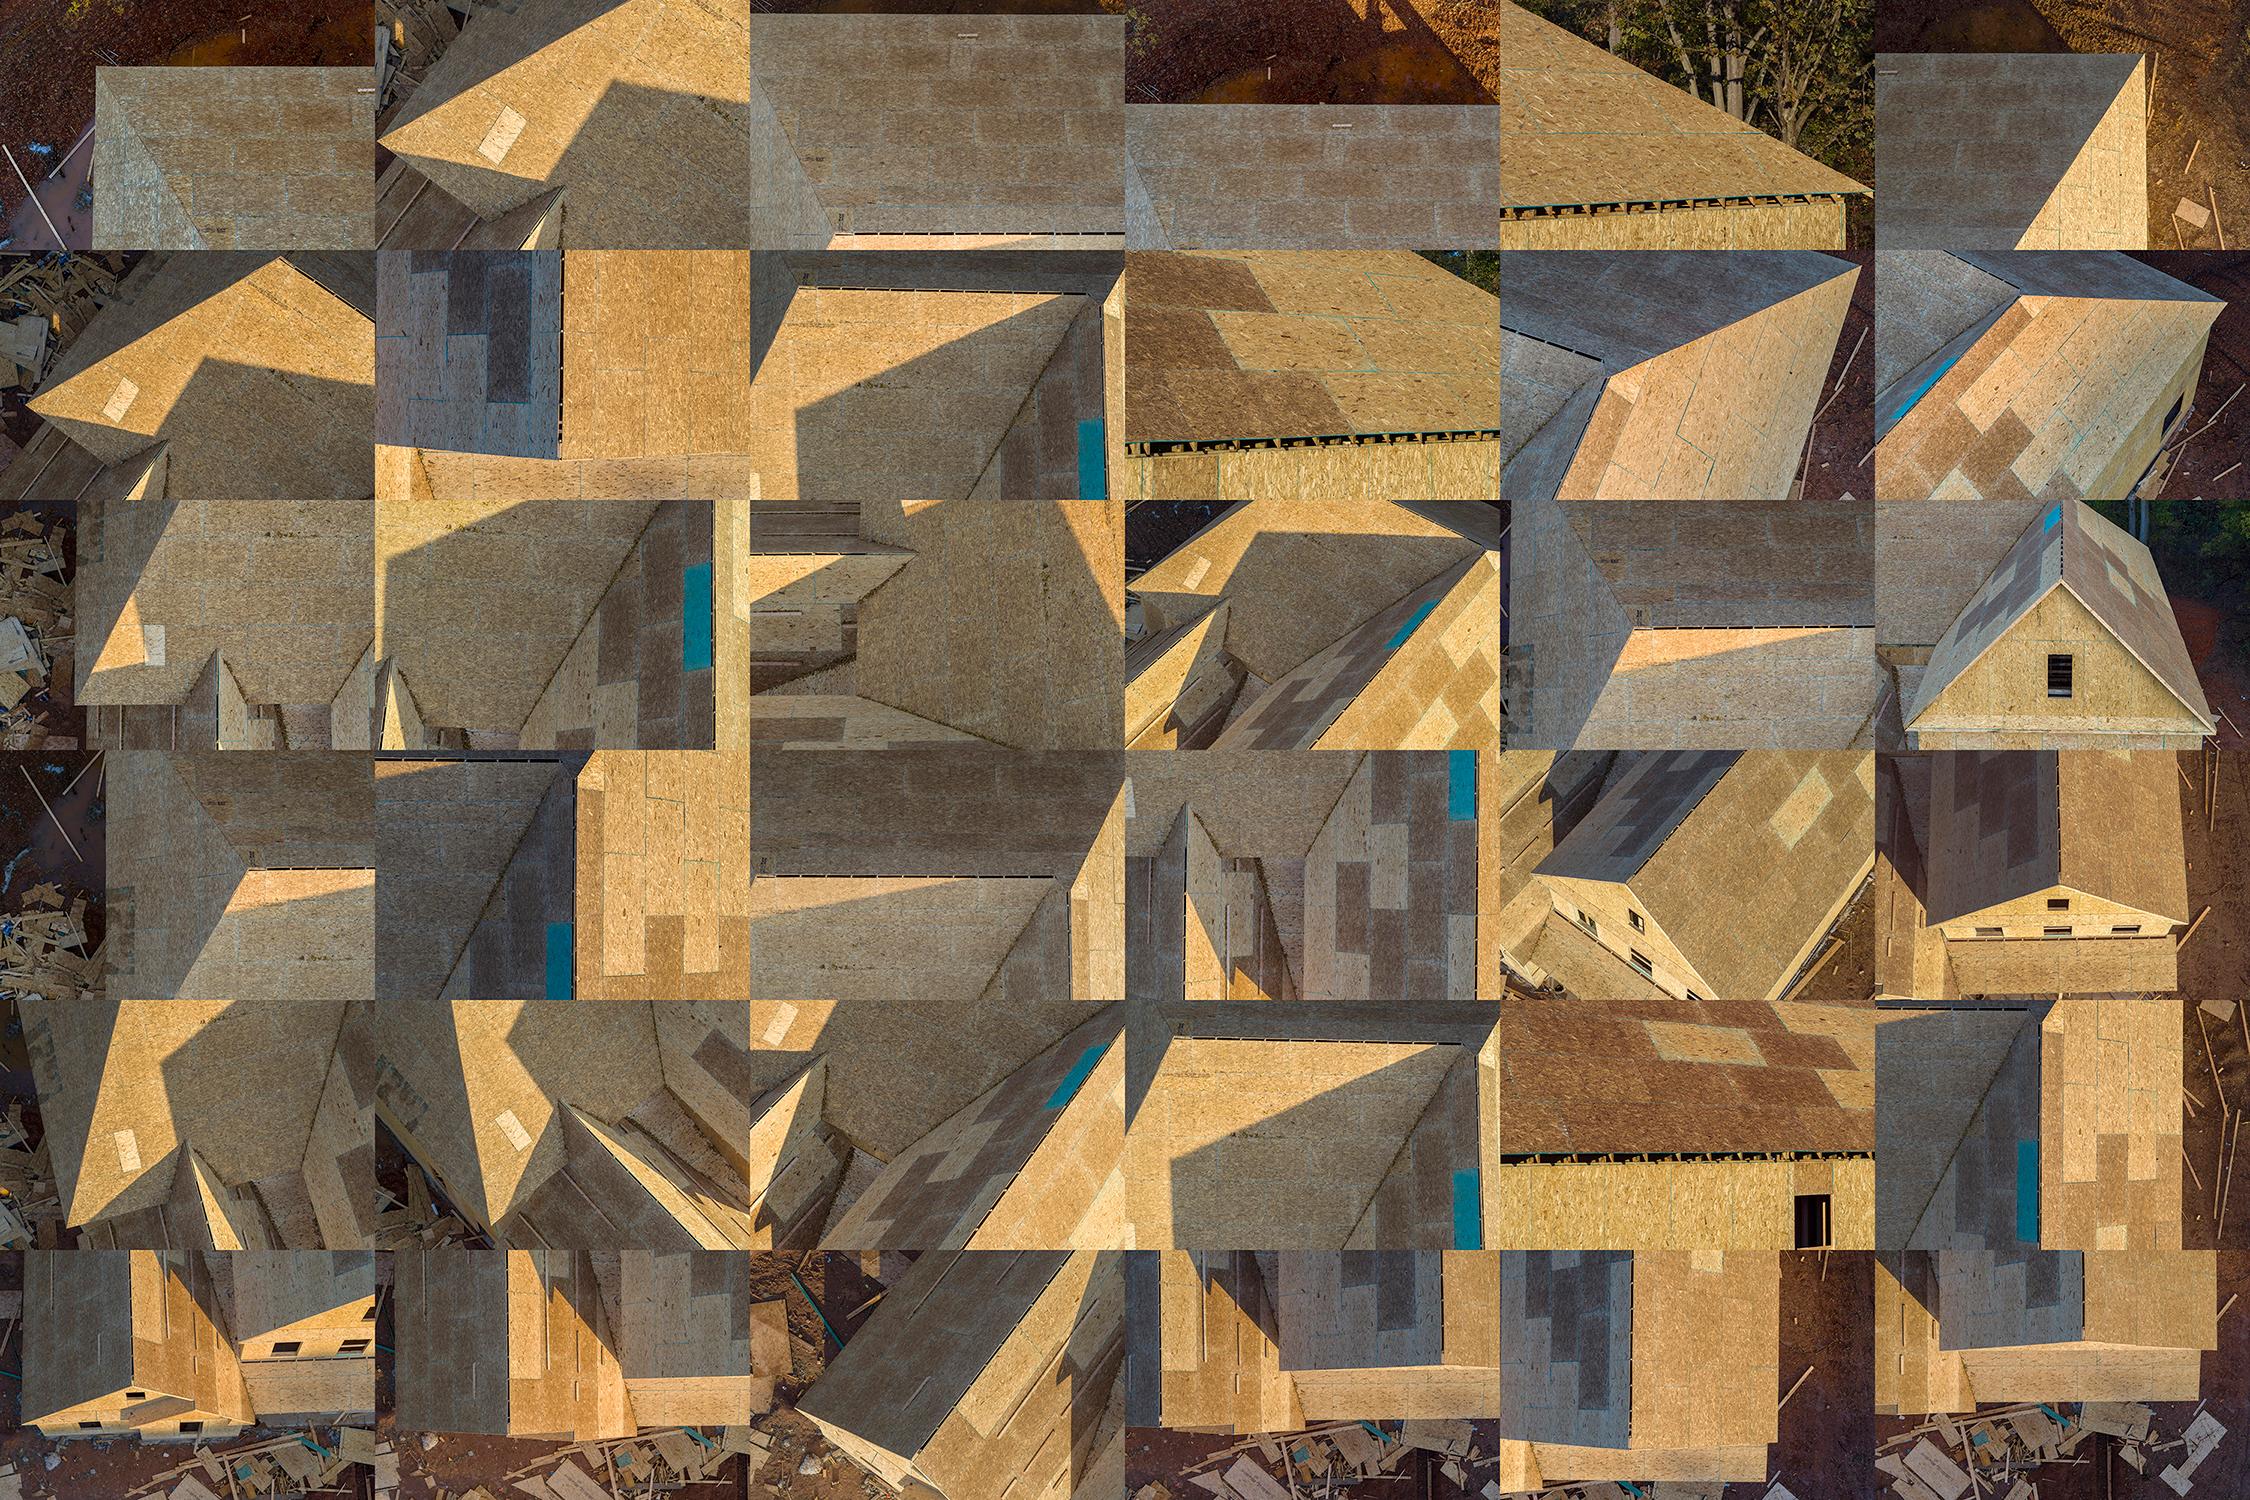 Peter Essick Abstract Photograph - "Construction Site (Roof), Stone Mountain, Georgia X 36" - Composite Photography